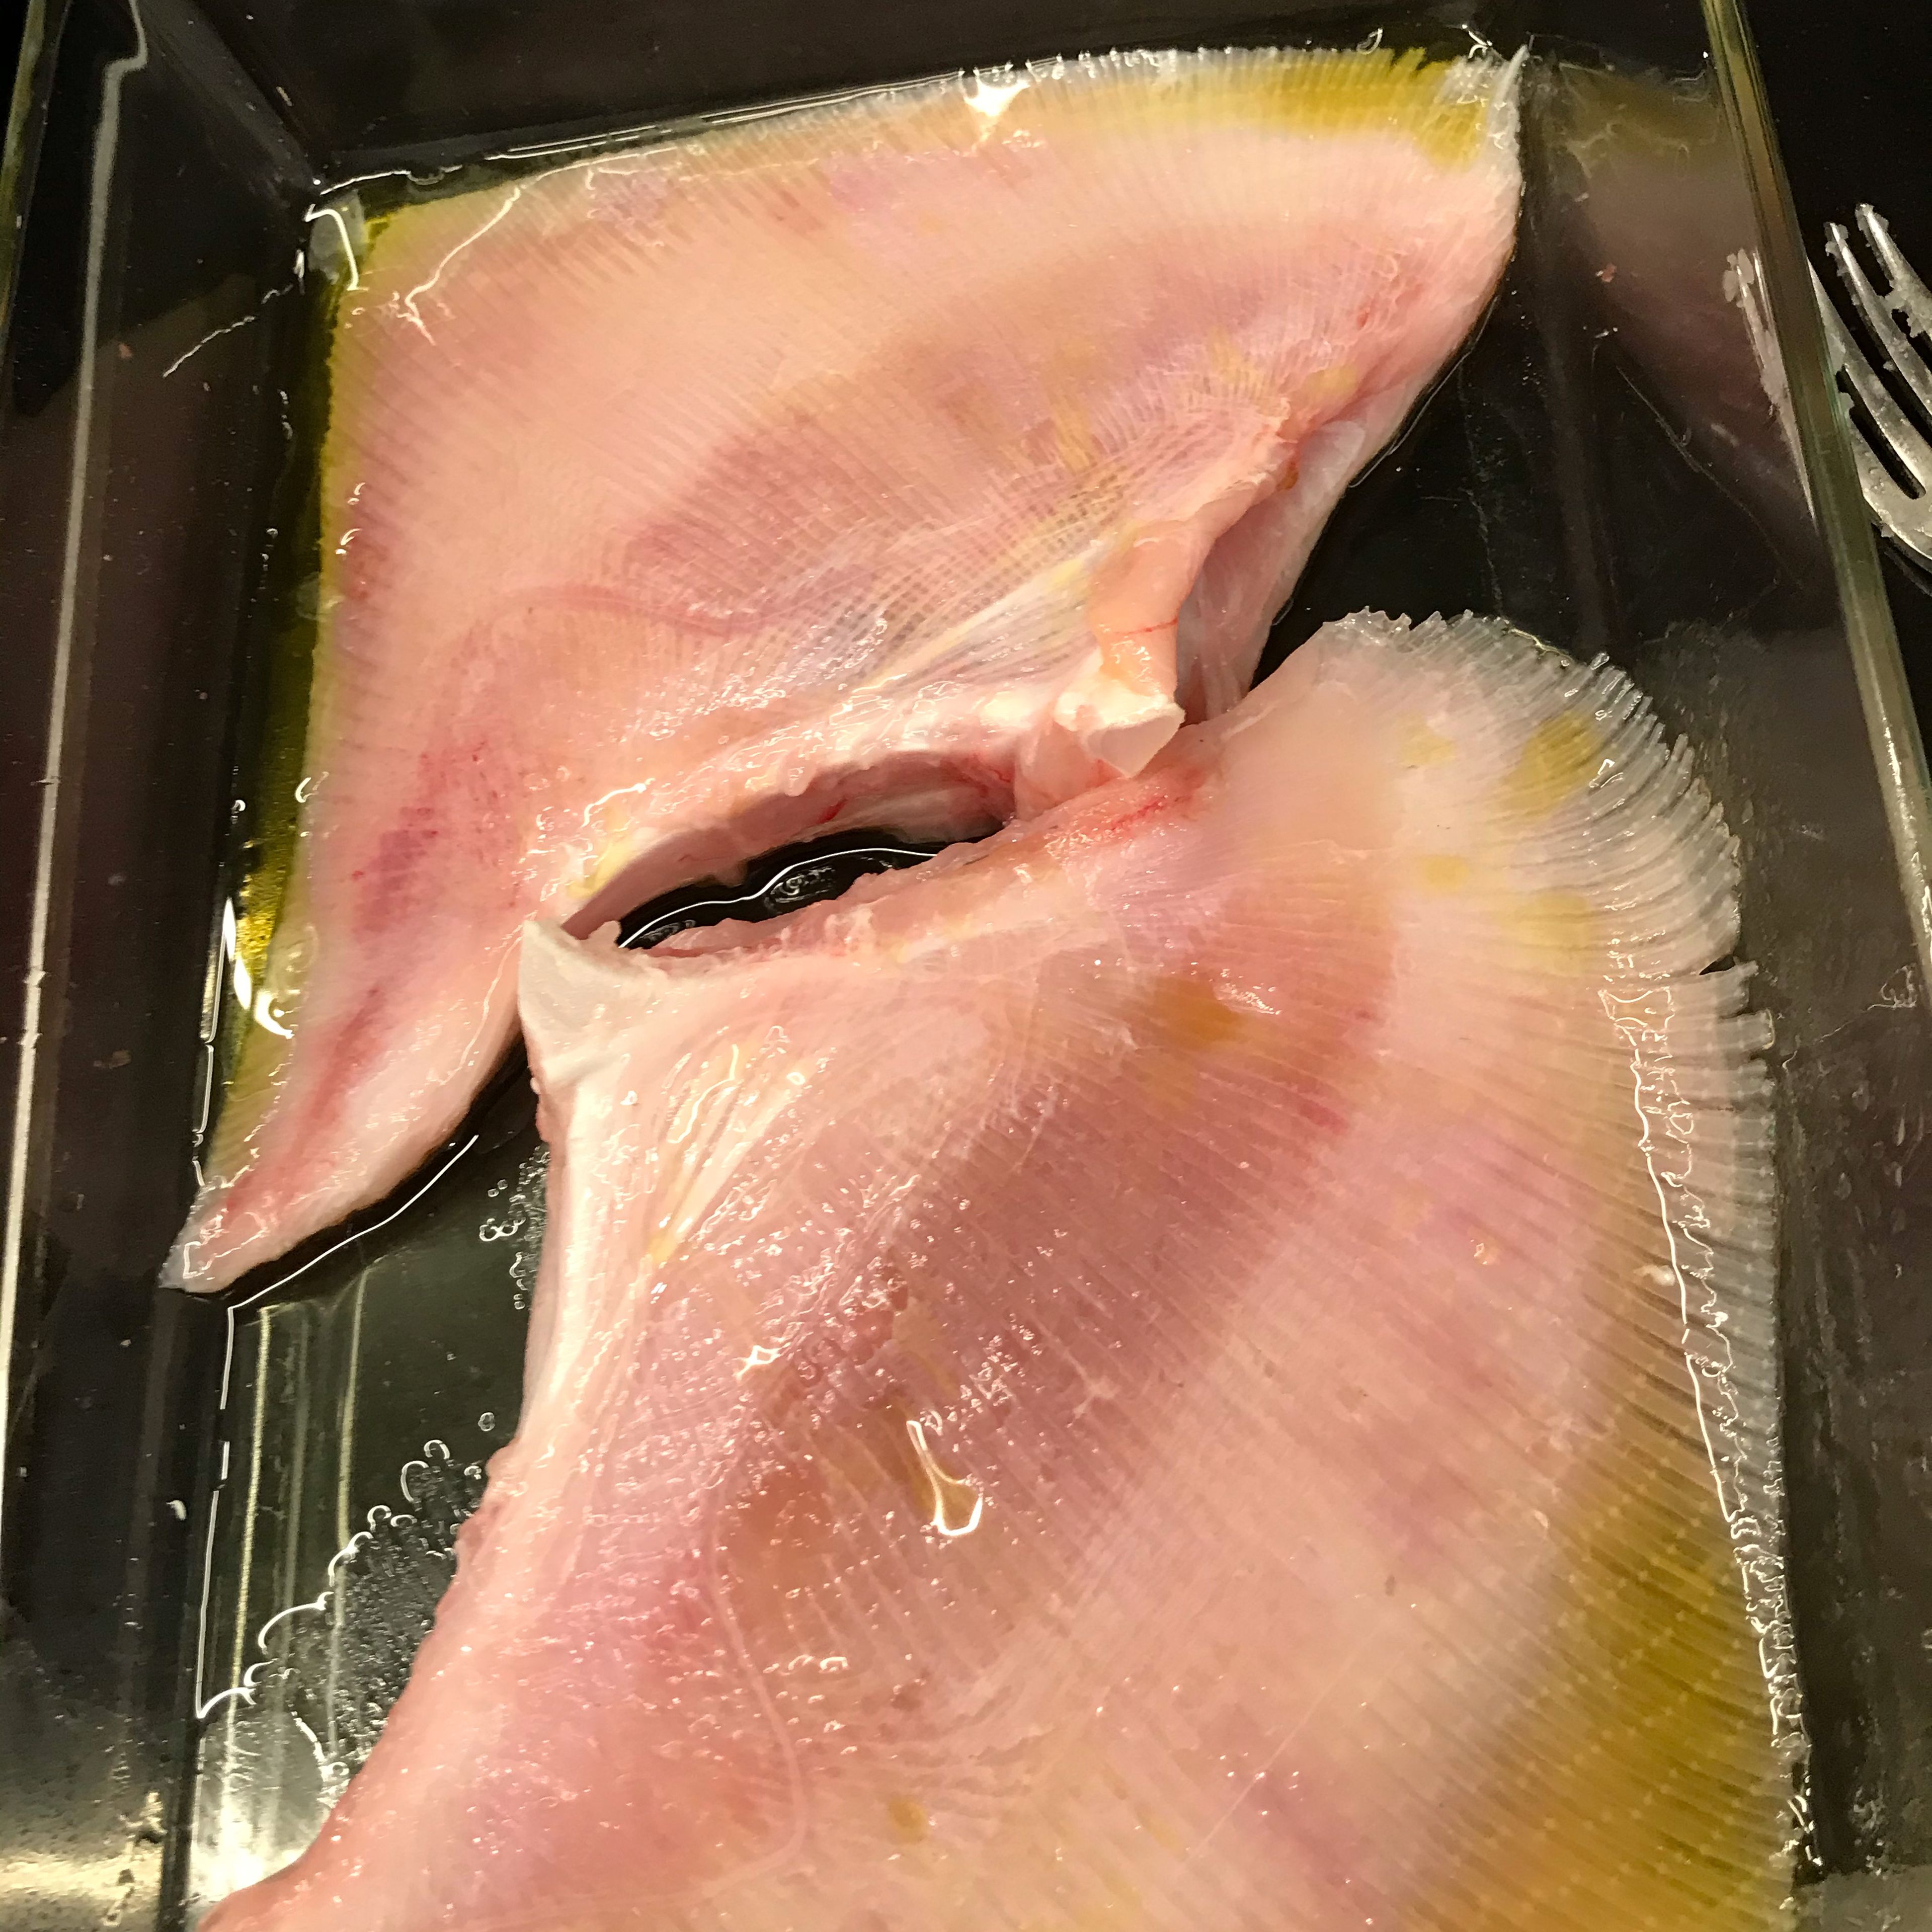 Pre-heat the oven at 210*C, pour olive oil in an oven dish and soak the two side of the skate.